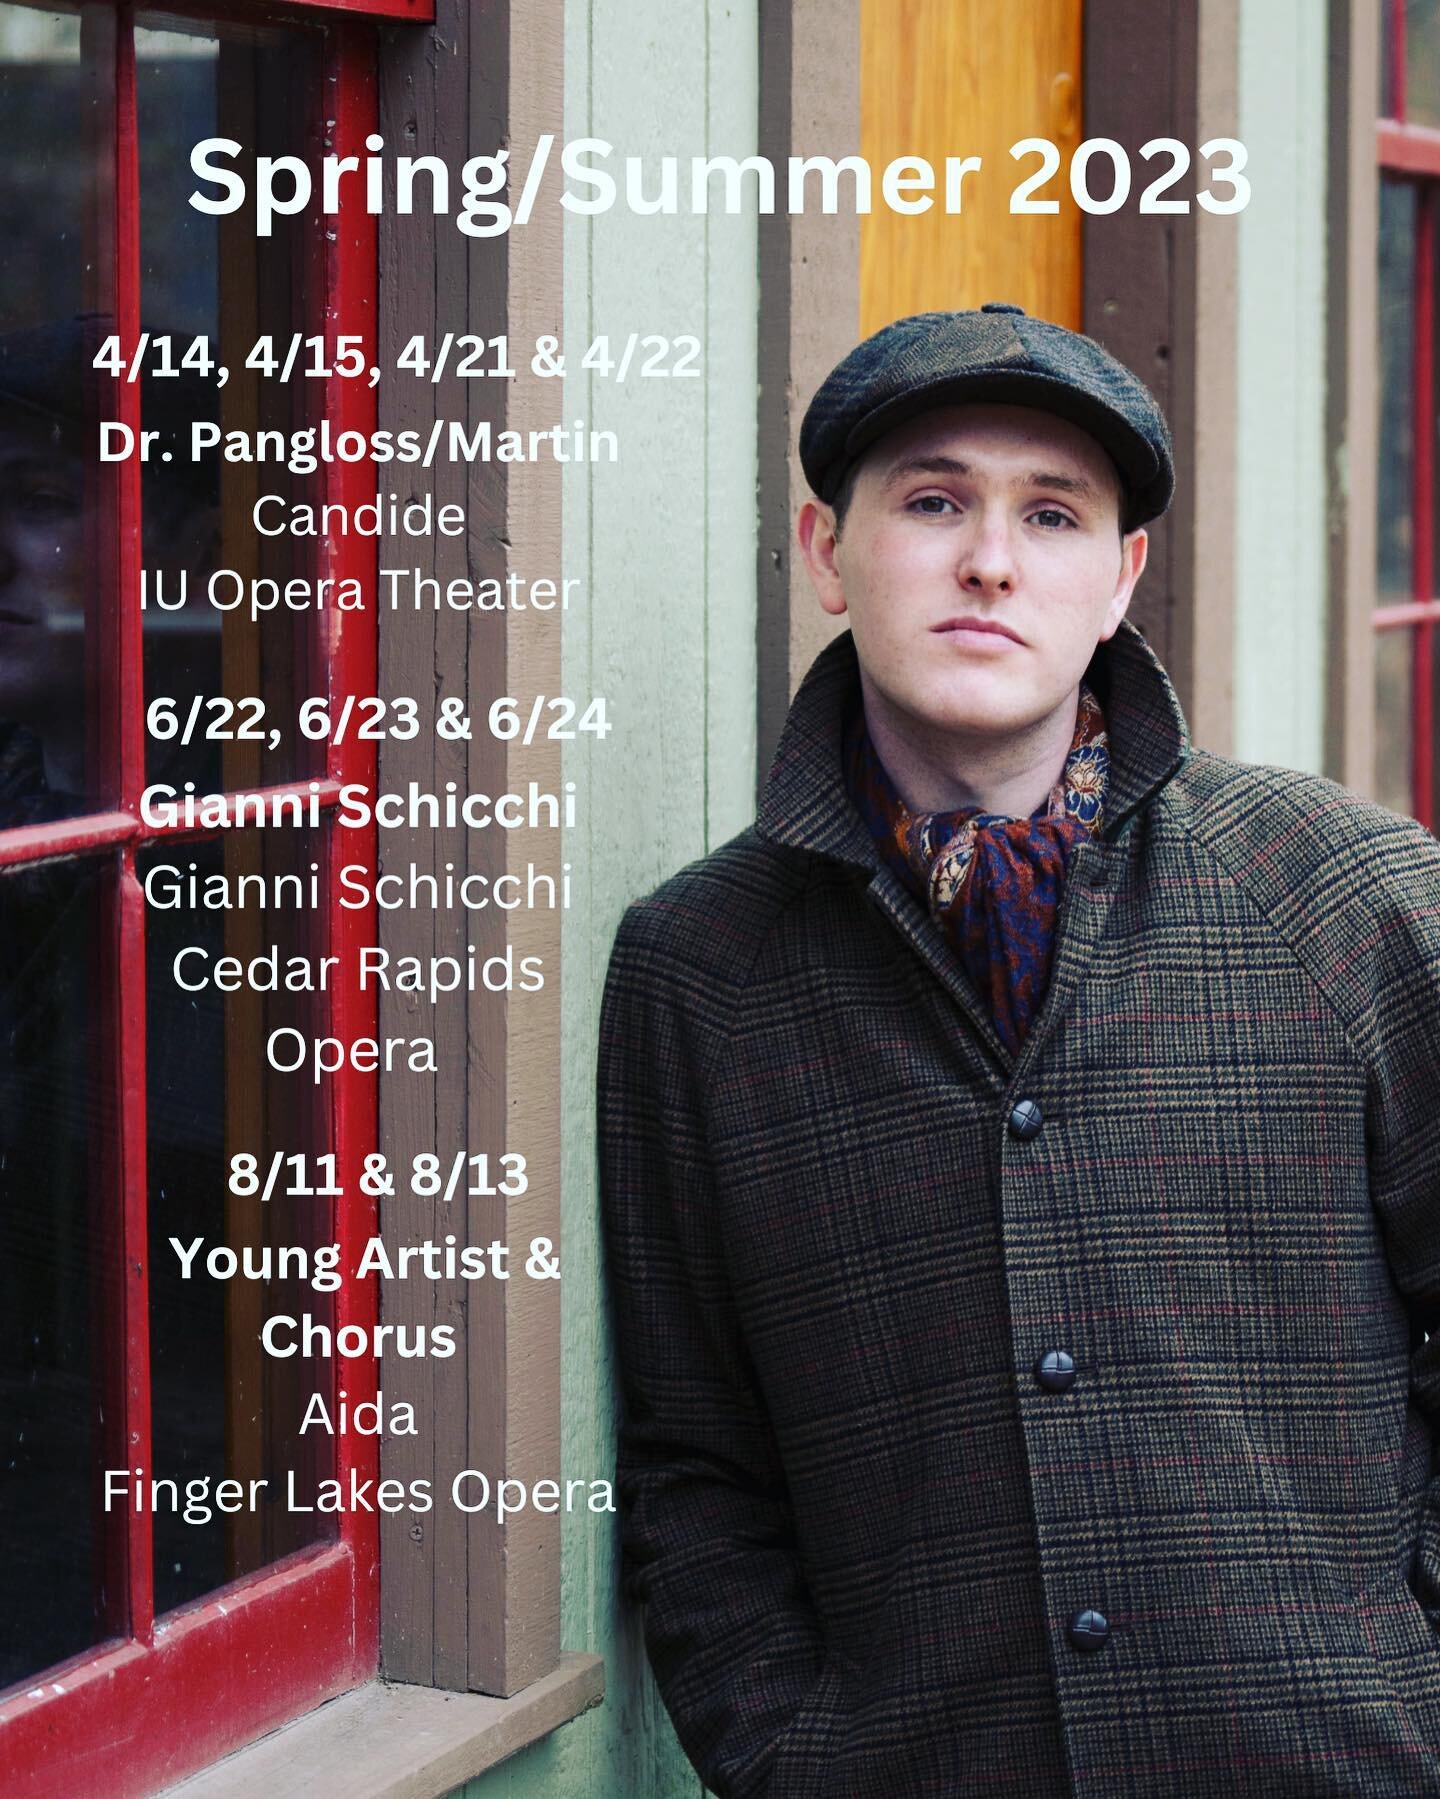 Upcoming gigs. Check &lsquo;em out. Happy to be singing throughout the spring and summer.